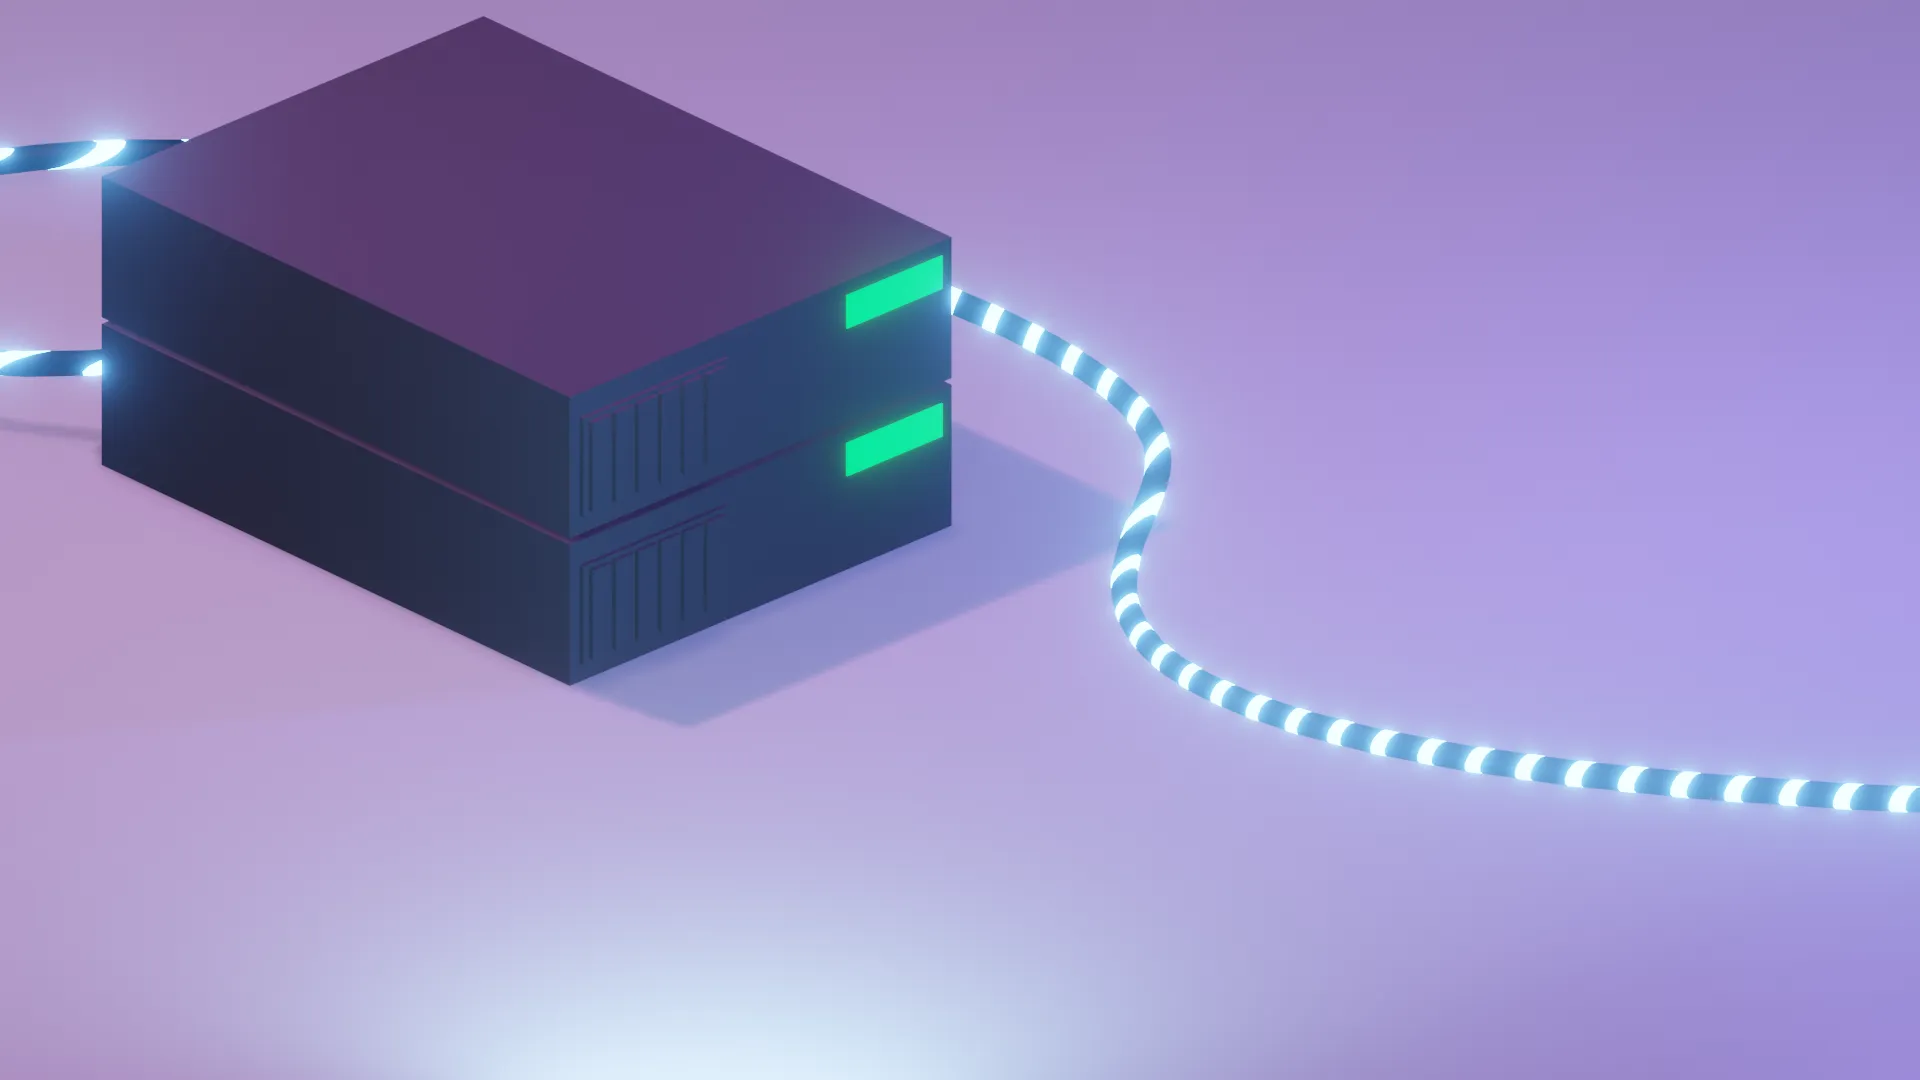 A minimalist rendering of an empty room bathed in a light purple glow. In the room are two rack-server units on the floor, stacked on top of each-other, while a single cable with a spiral glowing pattern exits from the back off to the right of the screen. Image created by TechSquidTV in Blender.